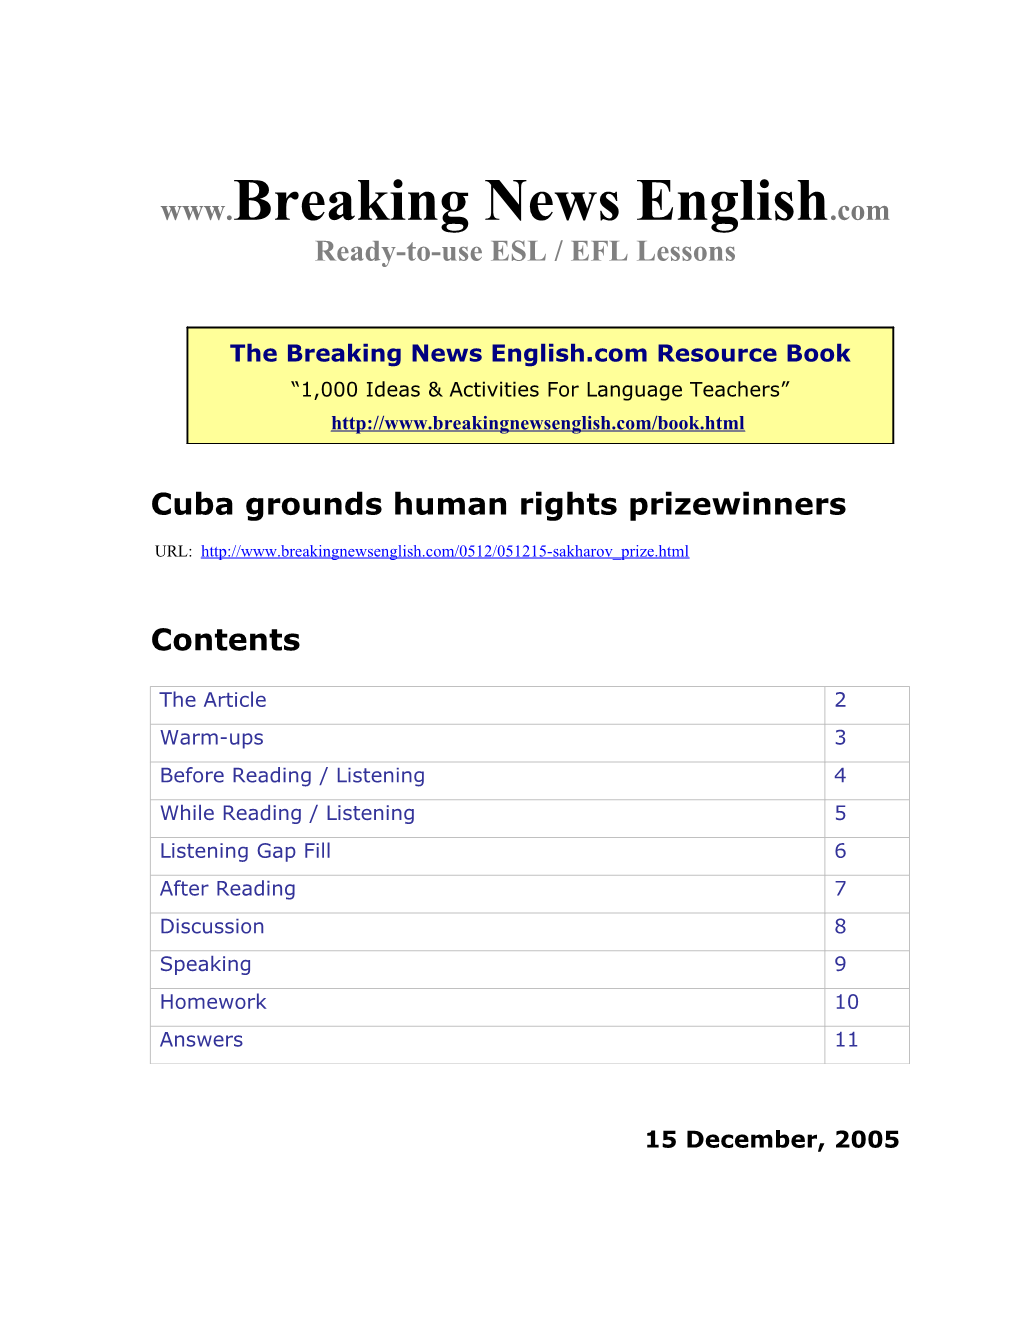 Cuba Grounds Human Rights Prizewinners